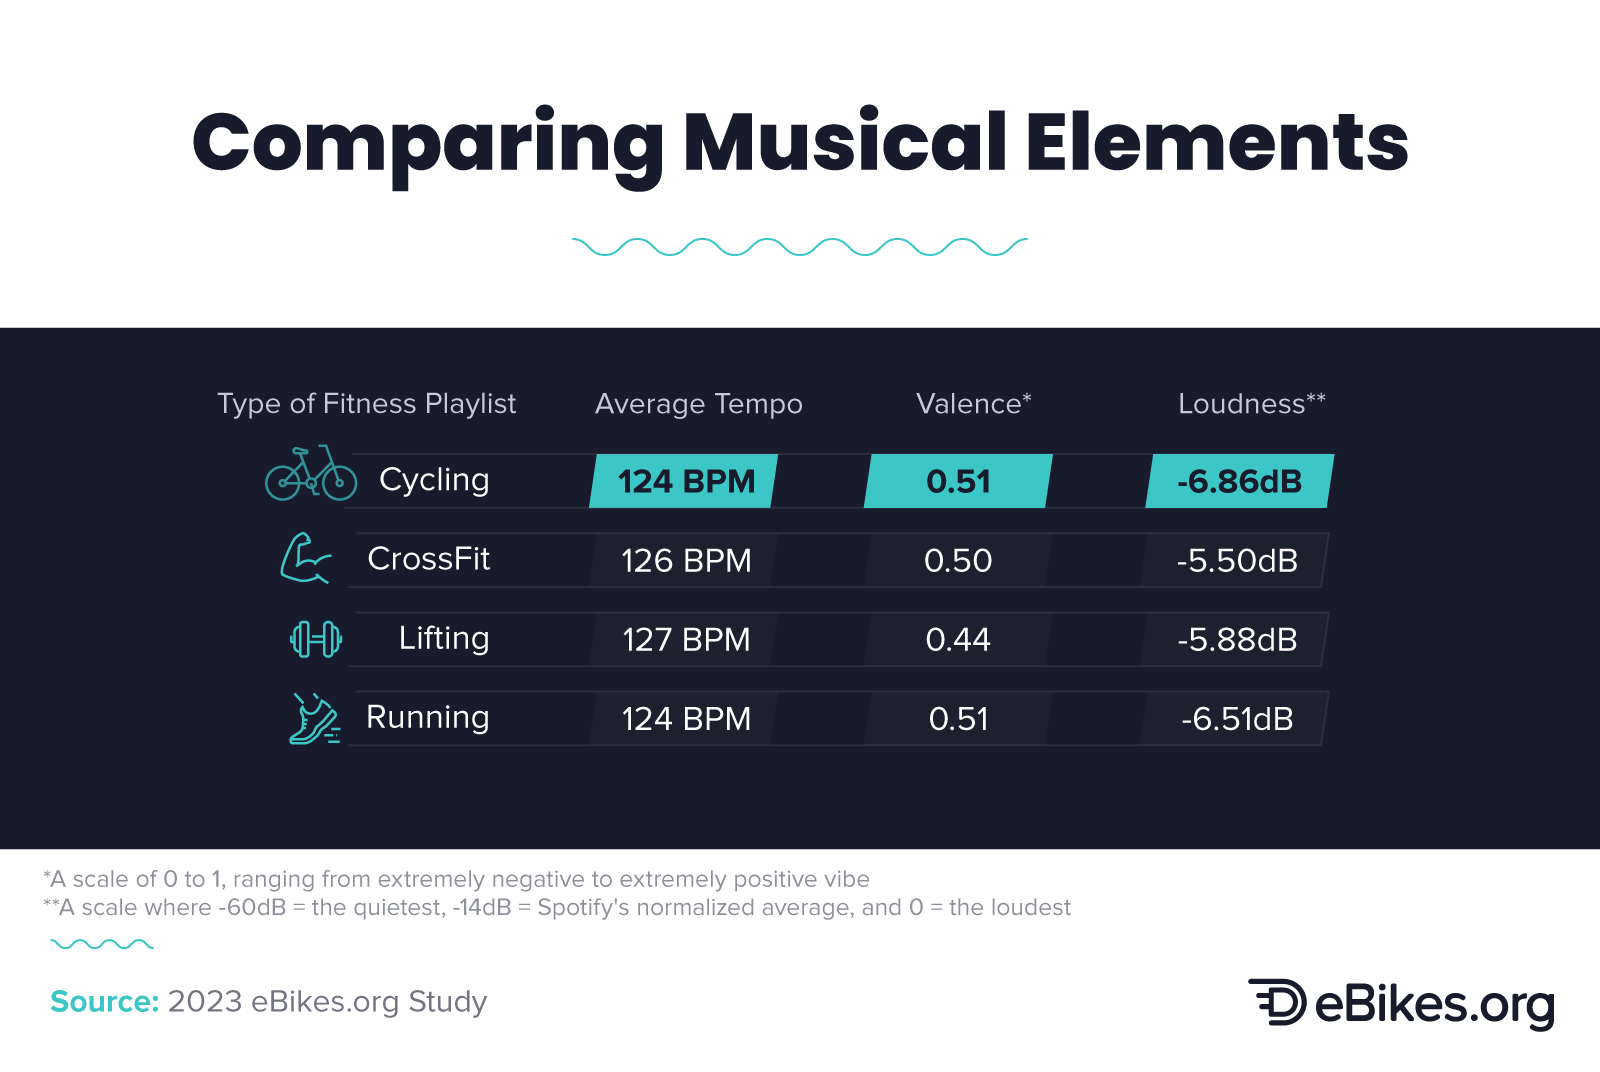 Infographic that compares musical elements, such as average tempo, valence, and loudness between types fitness playlists